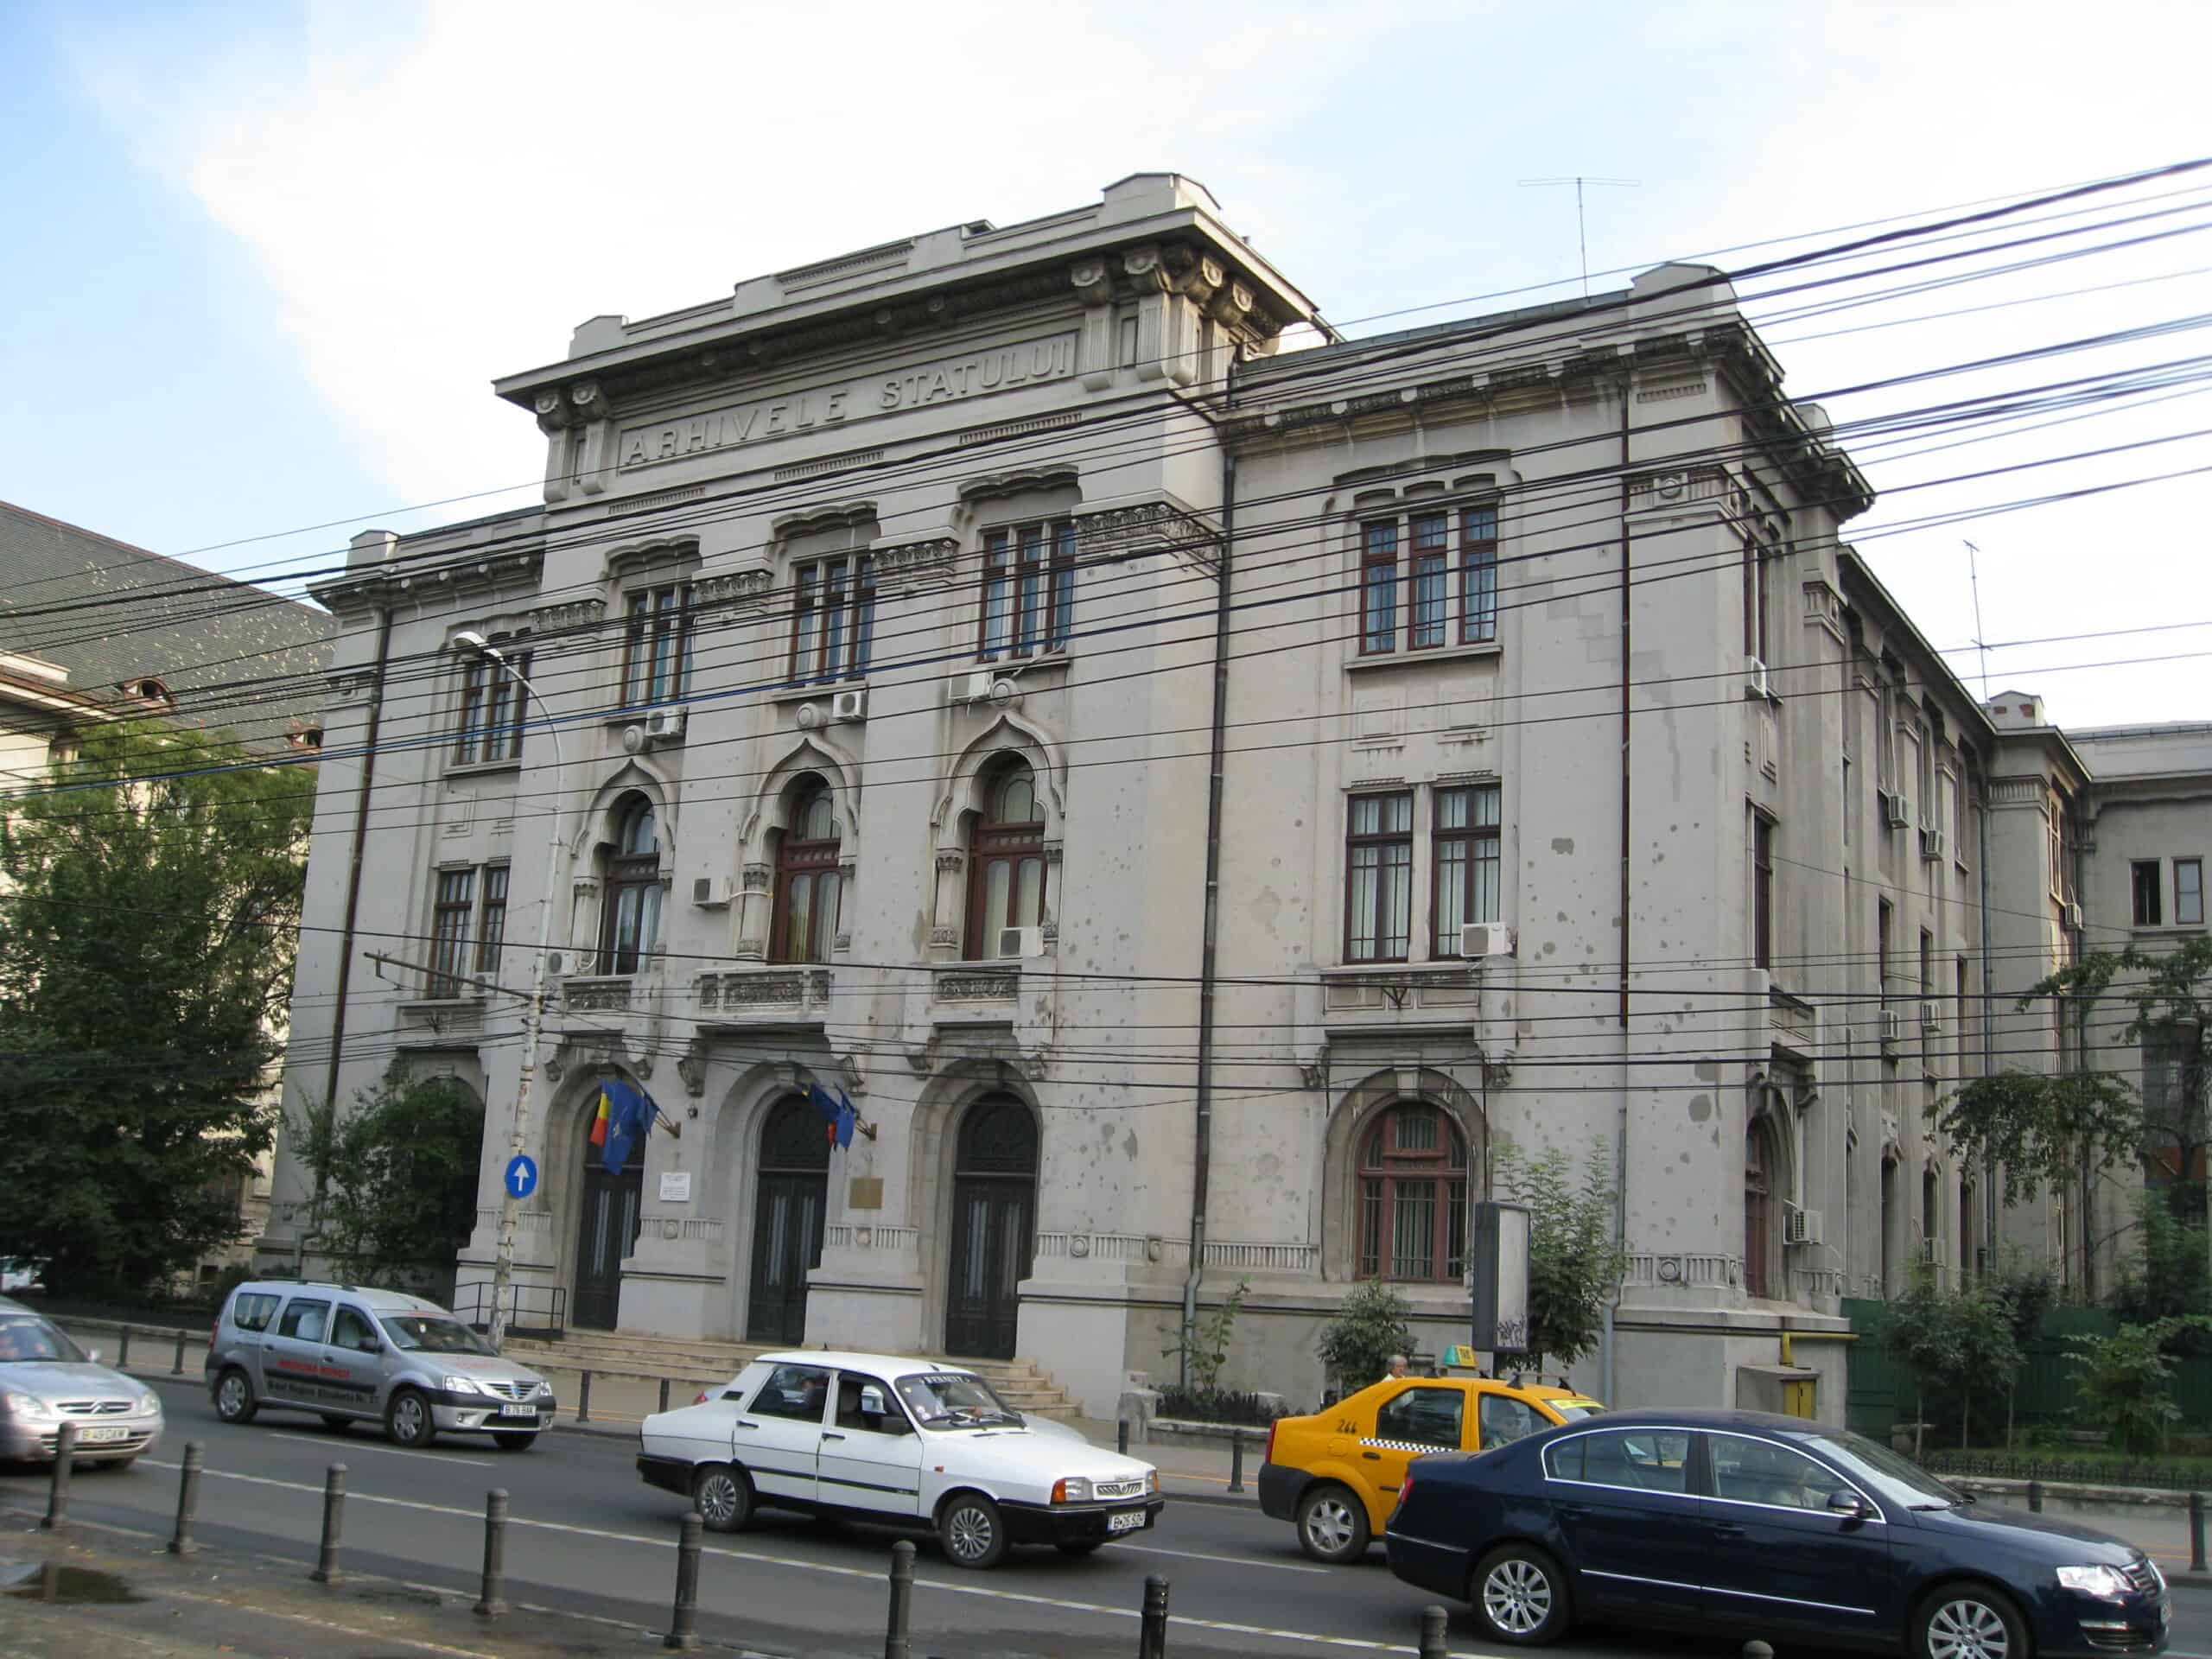 National archives of Romania